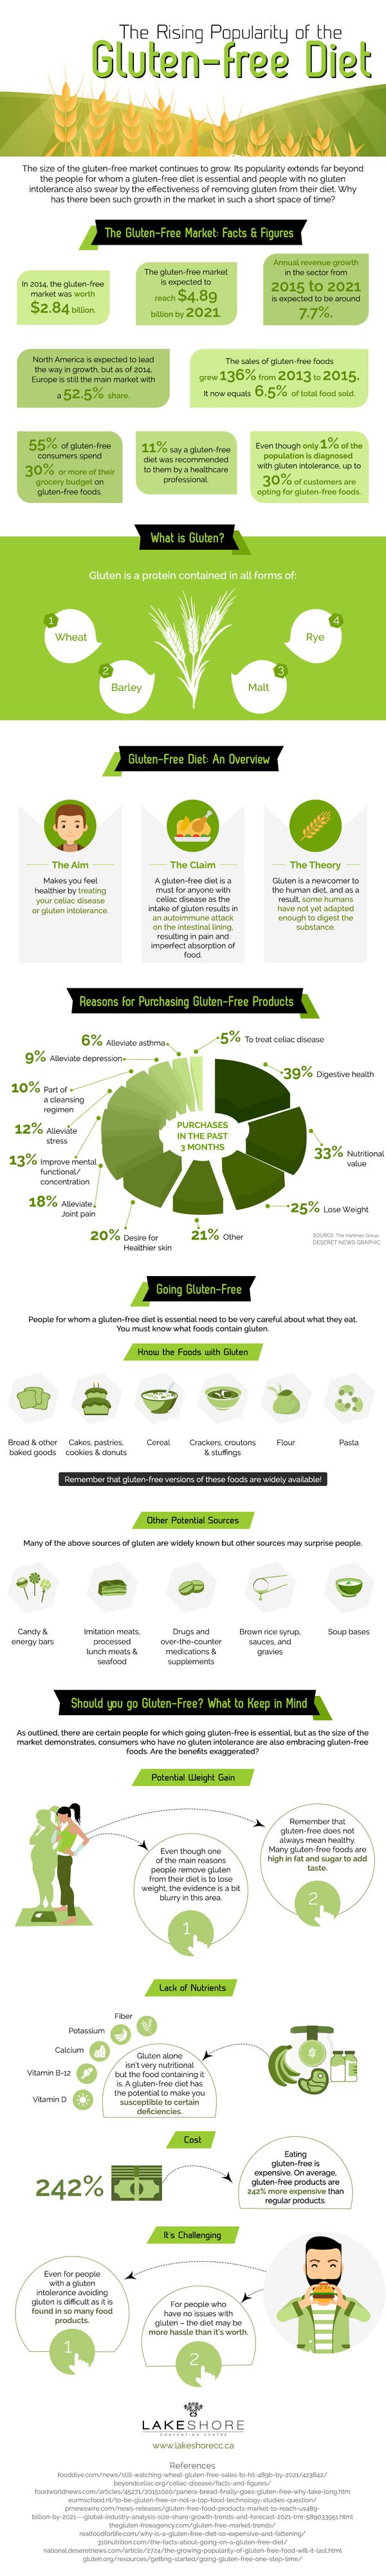 The Rising Popularity of the Gluten-Free Diet-Infographic